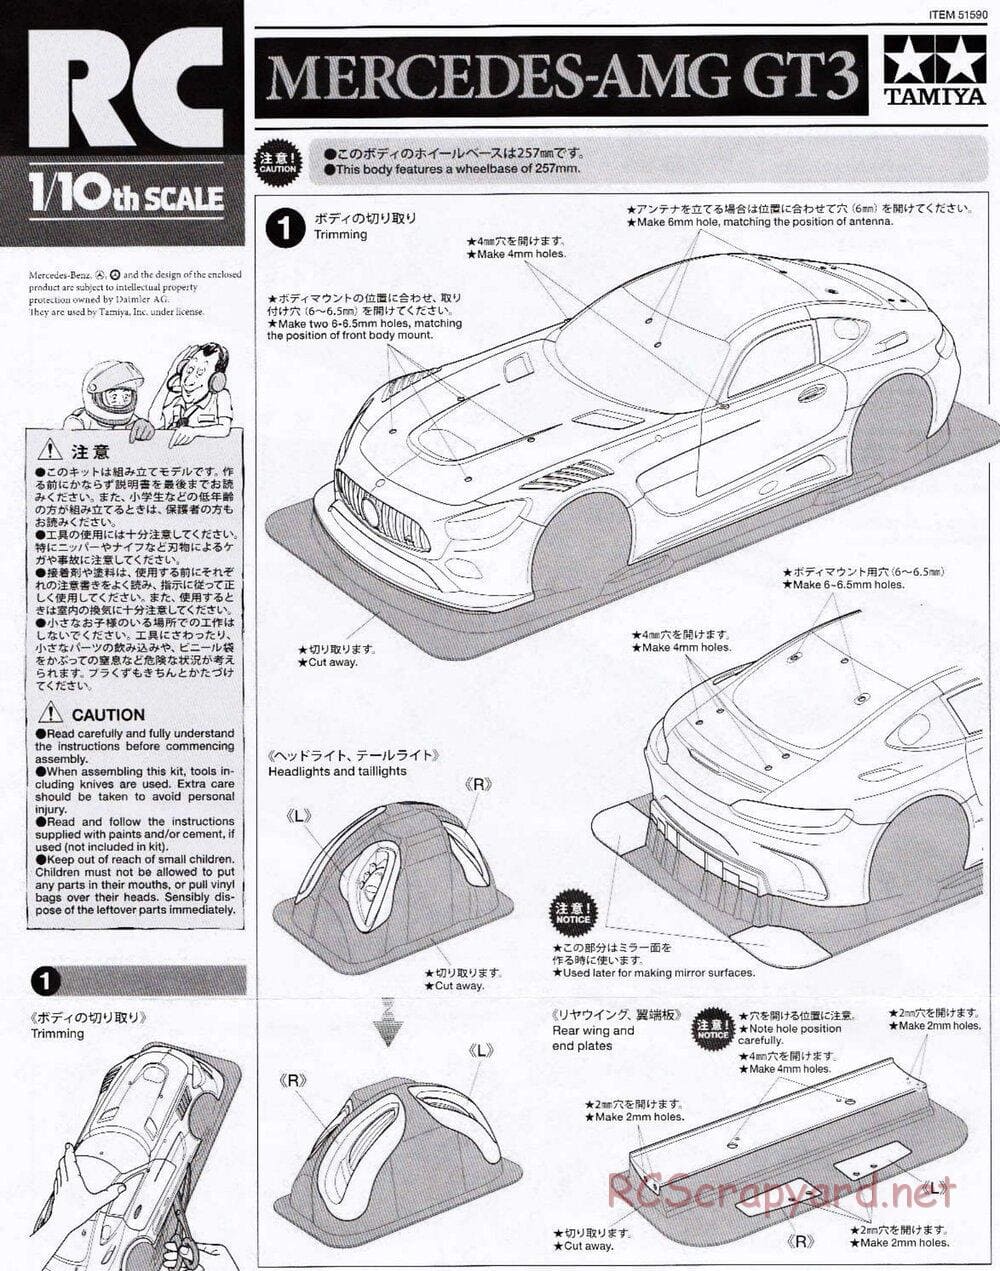 Tamiya - Mercedes AMG GT3 - TT-02 Chassis - Body Manual - Page 1